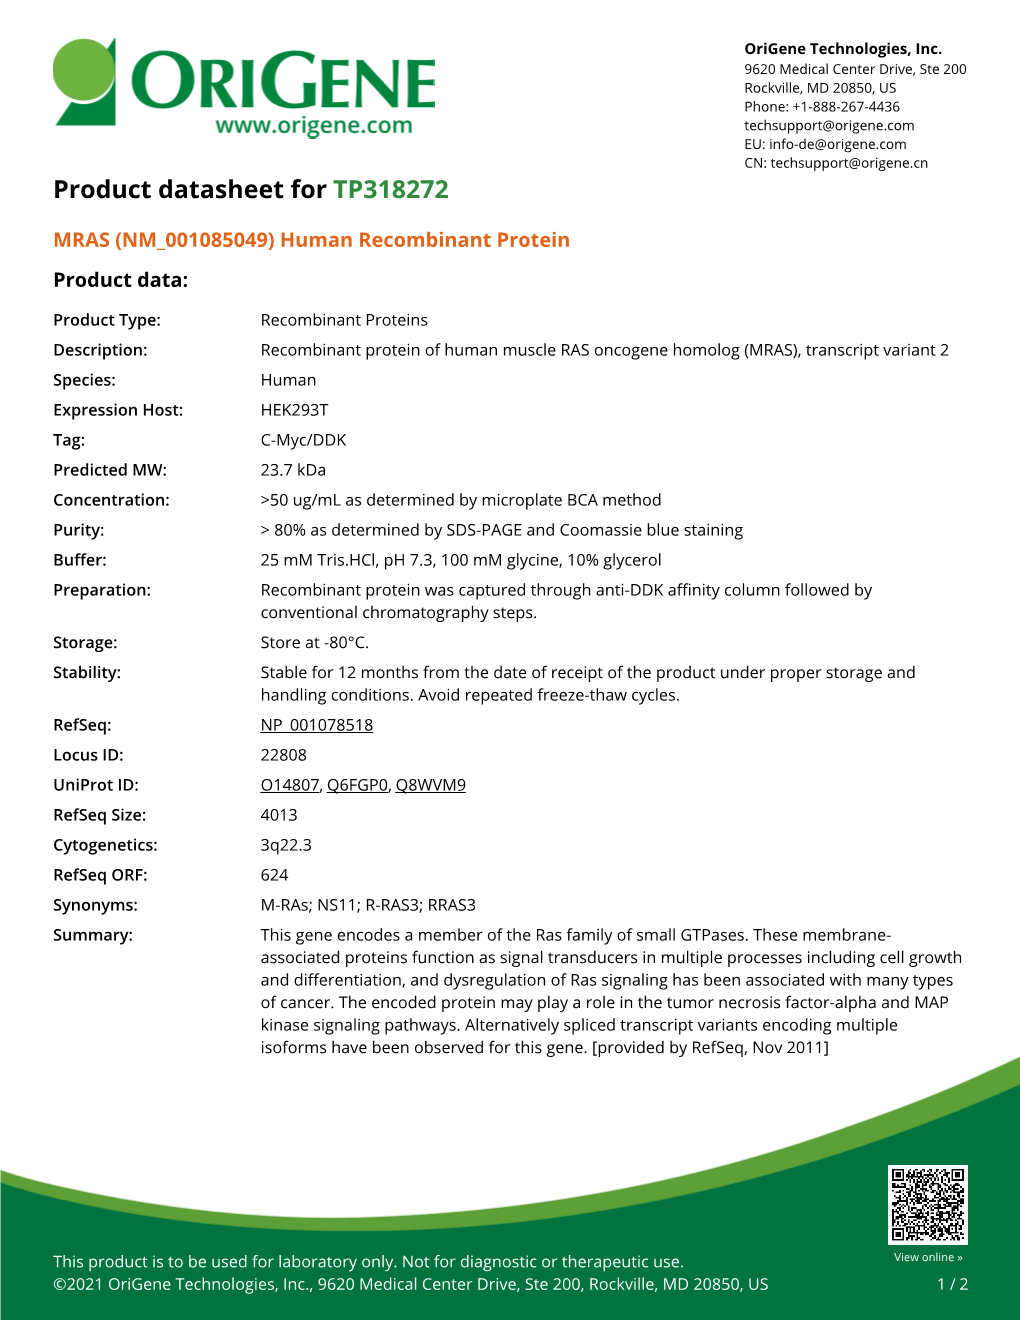 MRAS (NM 001085049) Human Recombinant Protein – TP318272